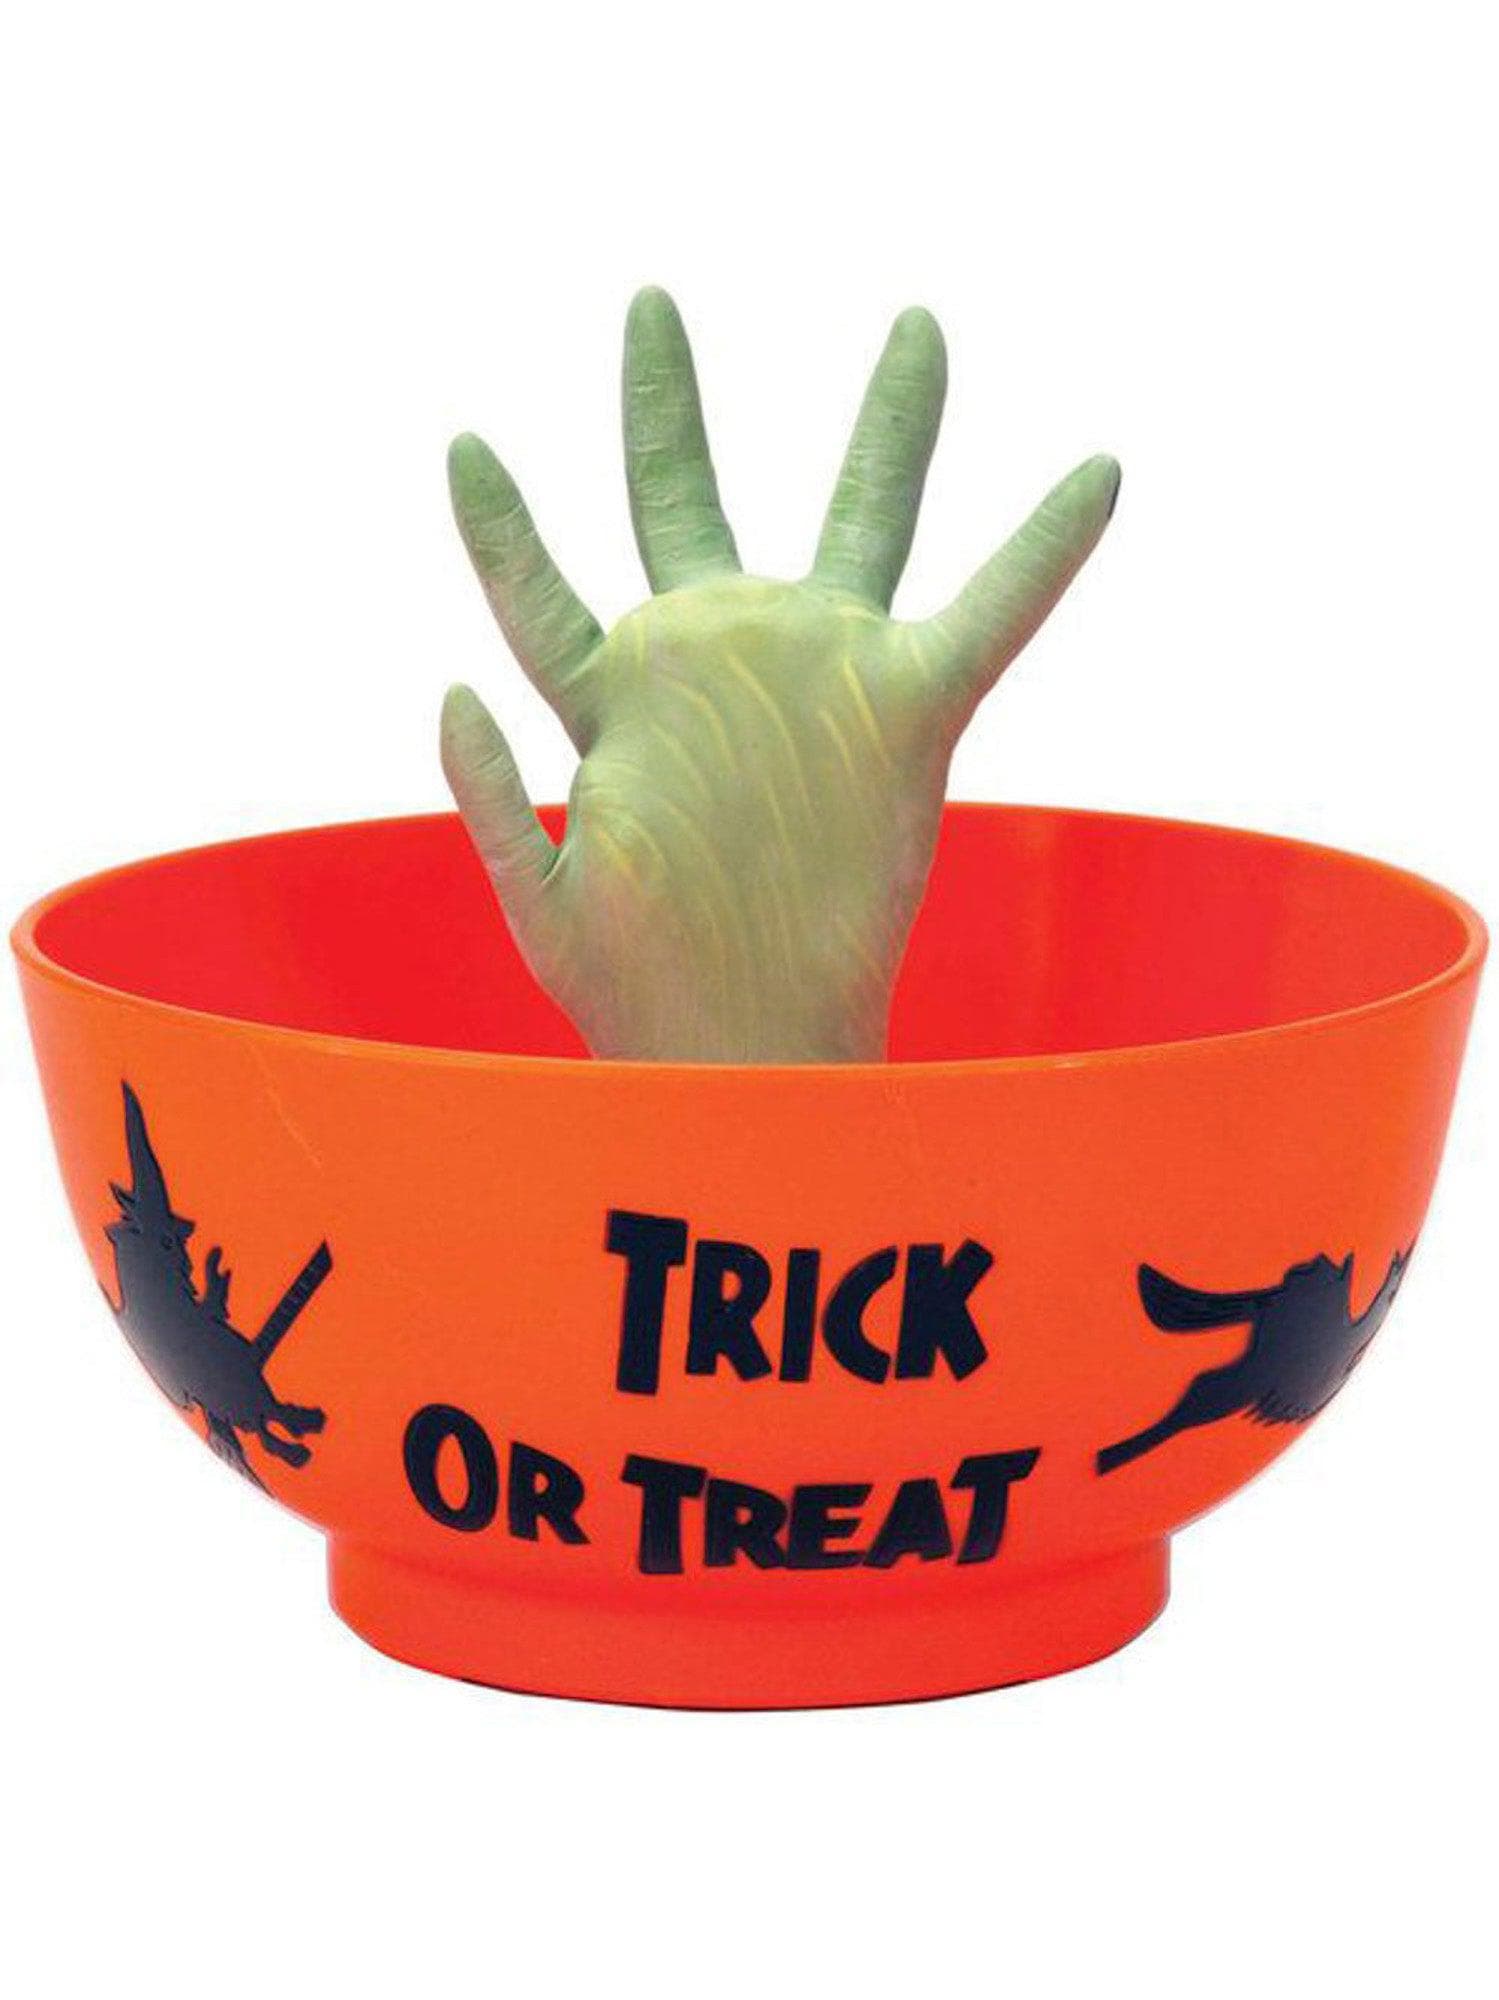 9-inch Animated Witch Hand Candy Bowl - costumes.com